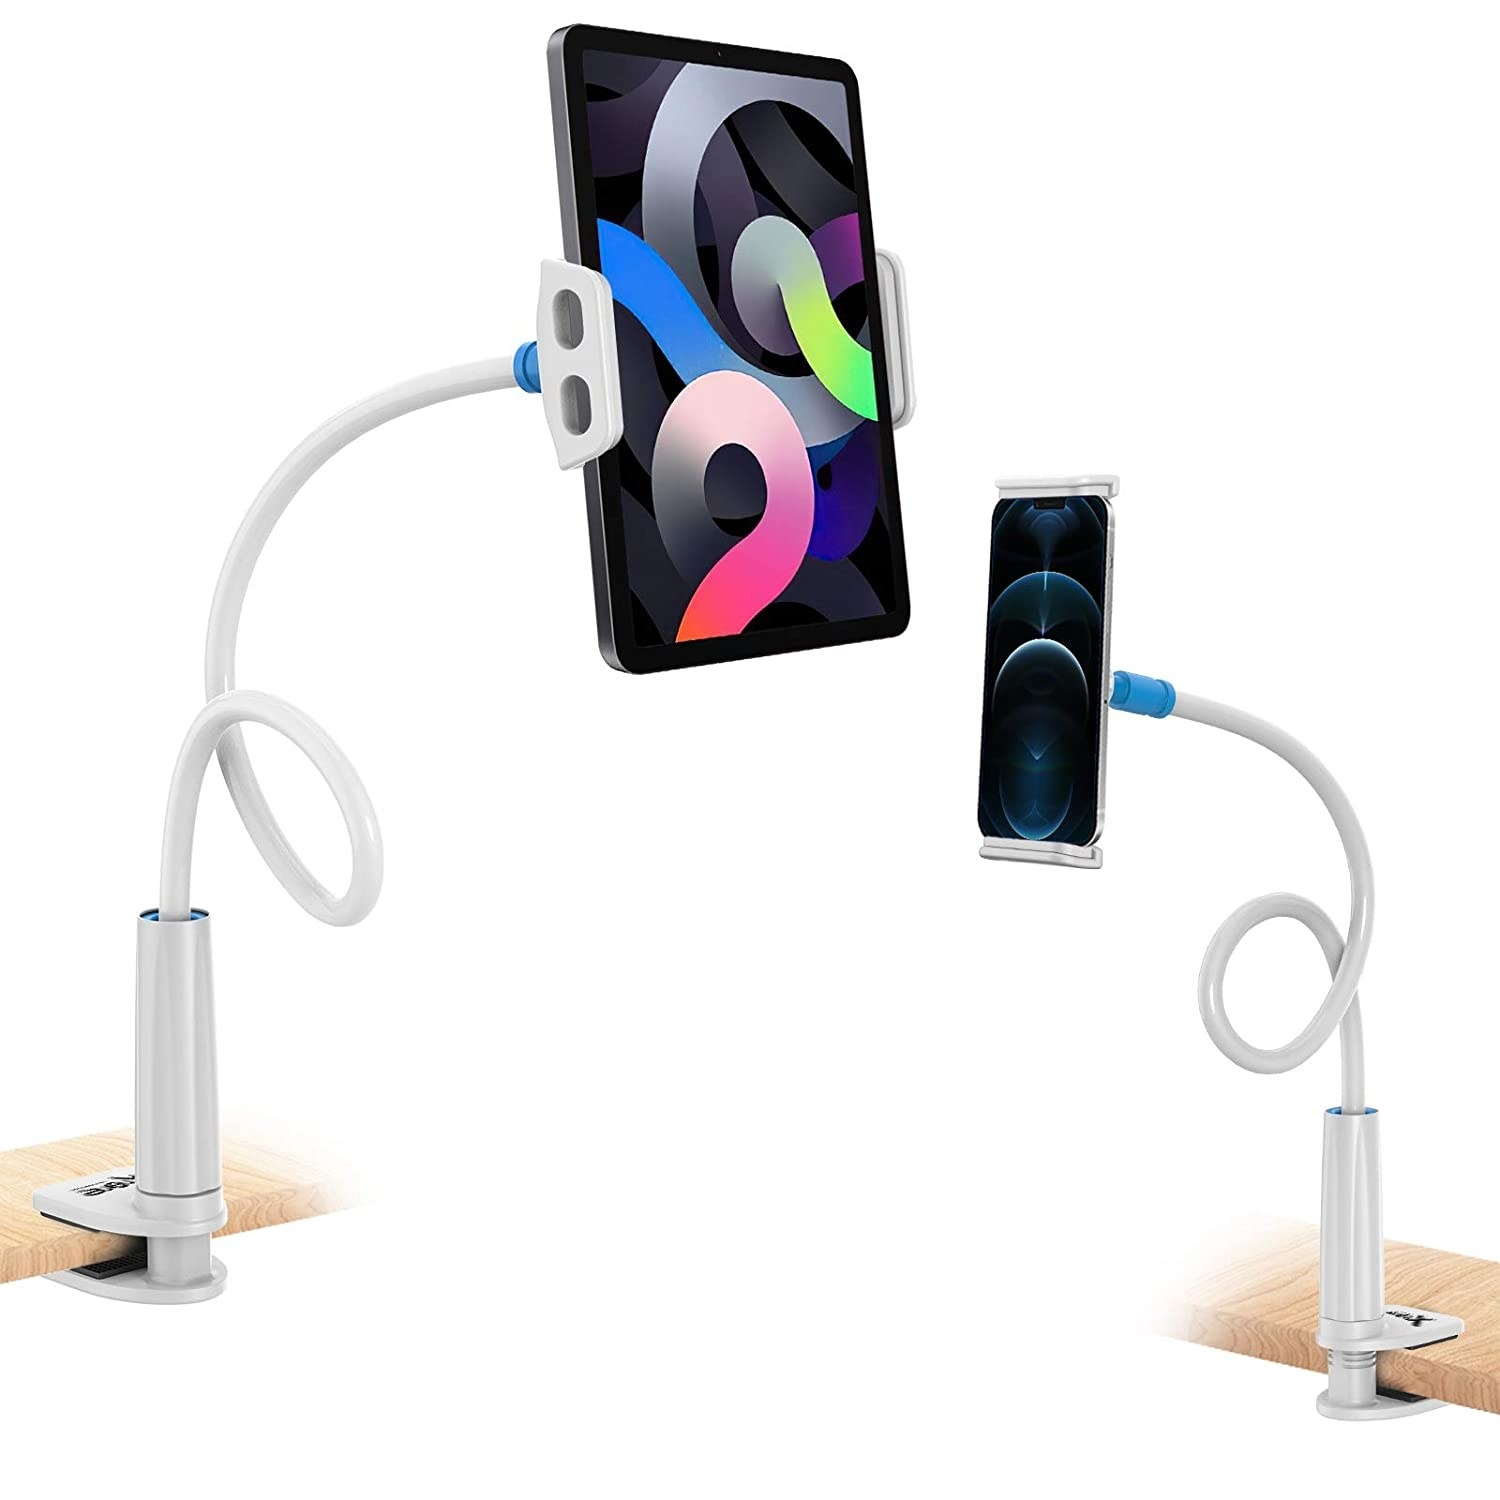 A tablet and a phone attached to two Xtore® holders in white.